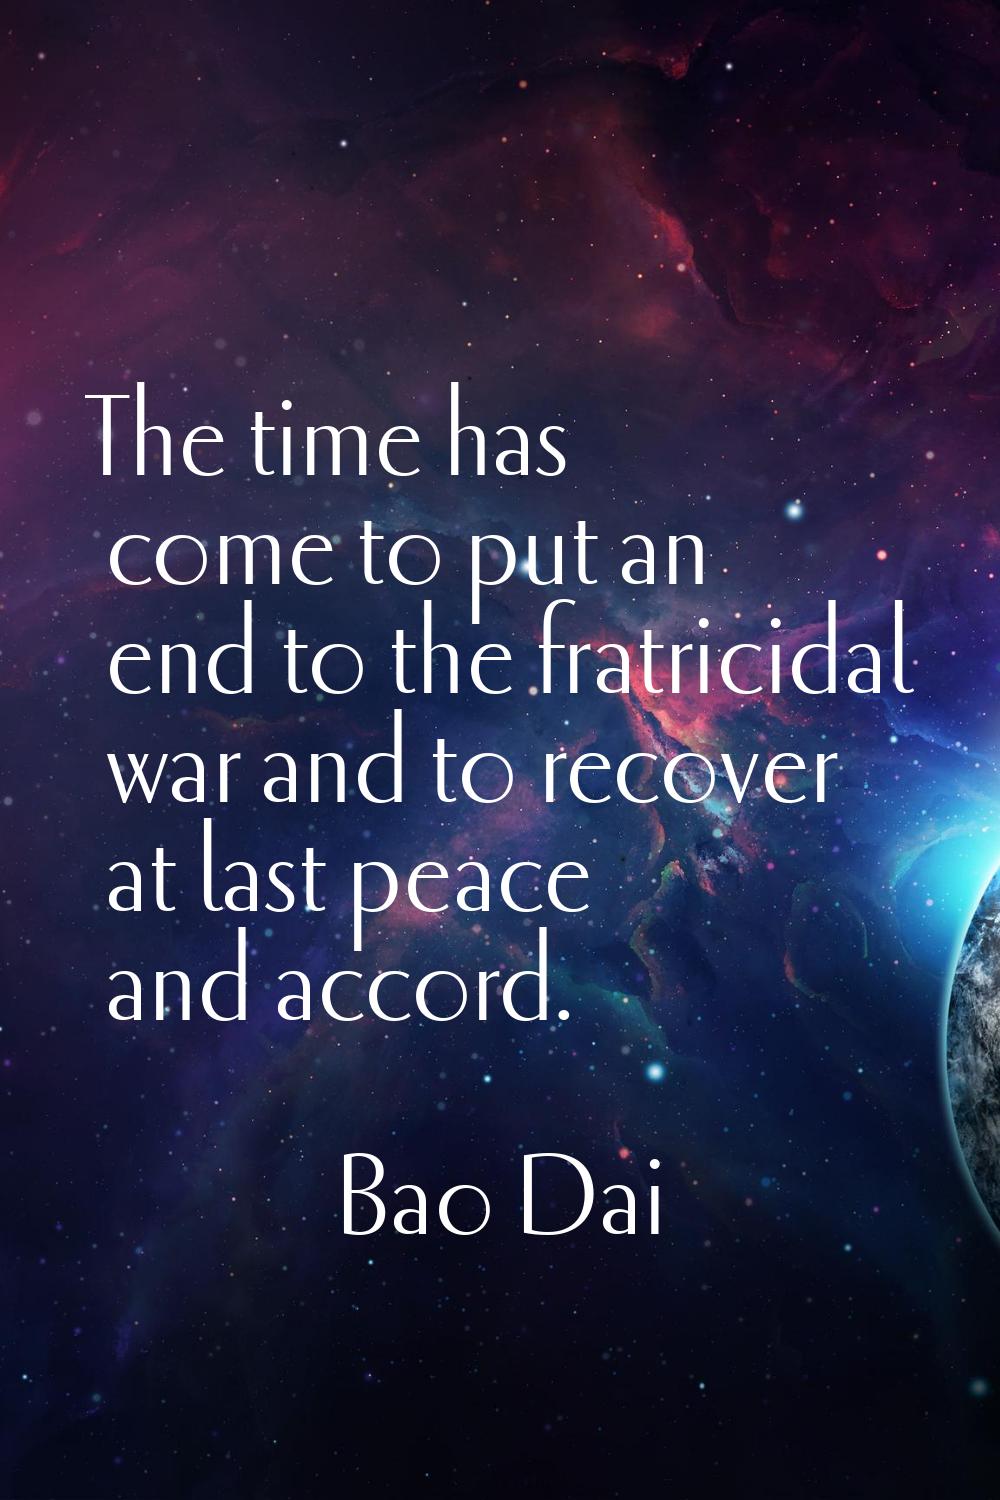 The time has come to put an end to the fratricidal war and to recover at last peace and accord.